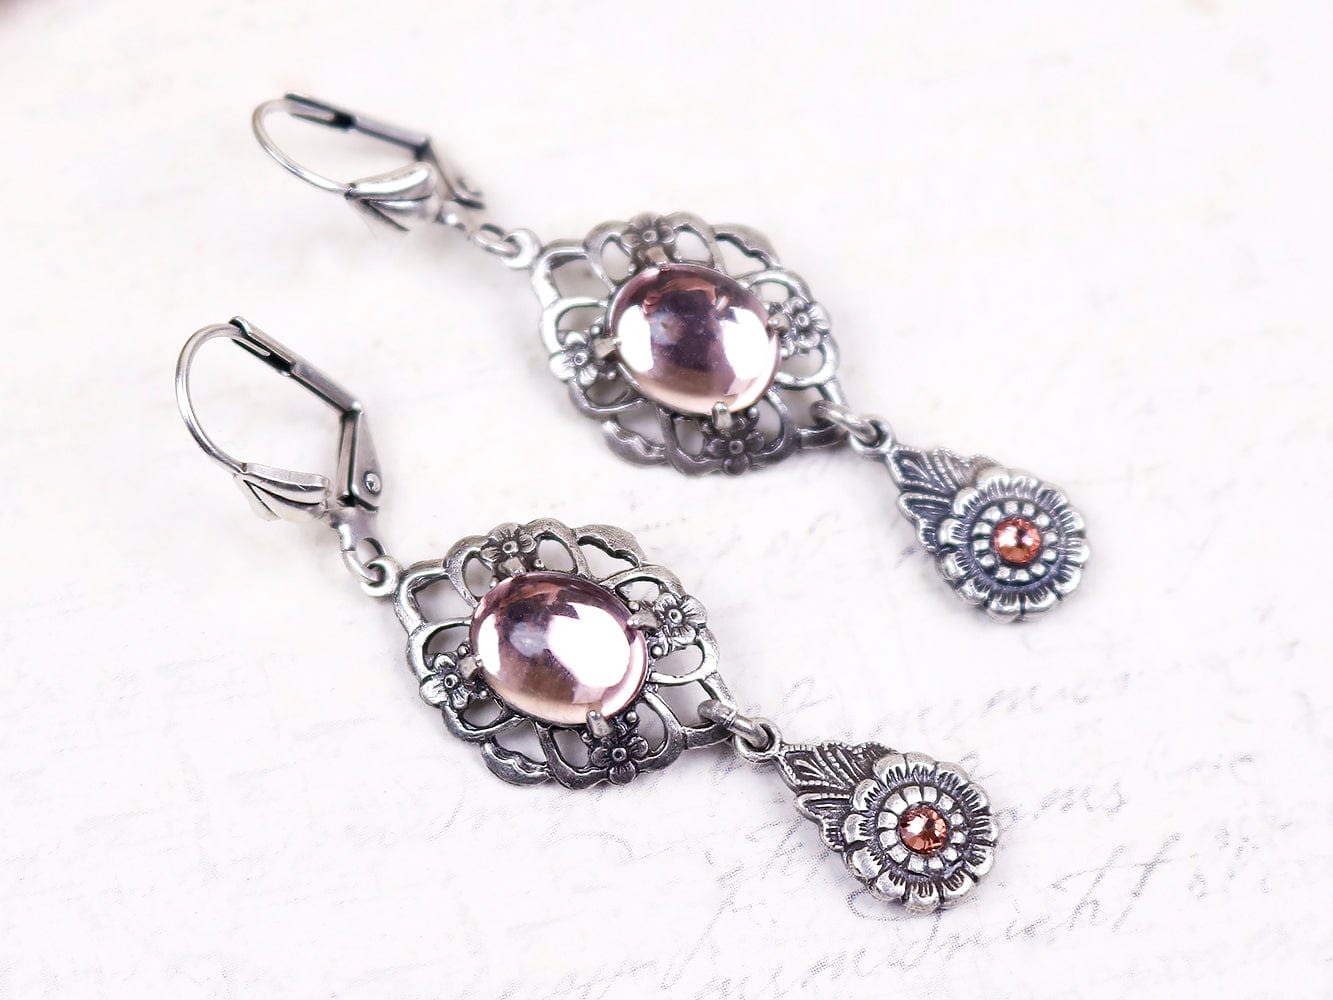 Drucilla Earrings in Pale Rosebud with Vintage Rose accent crystals - Antiqued Silver by Rabbitwood and Reason